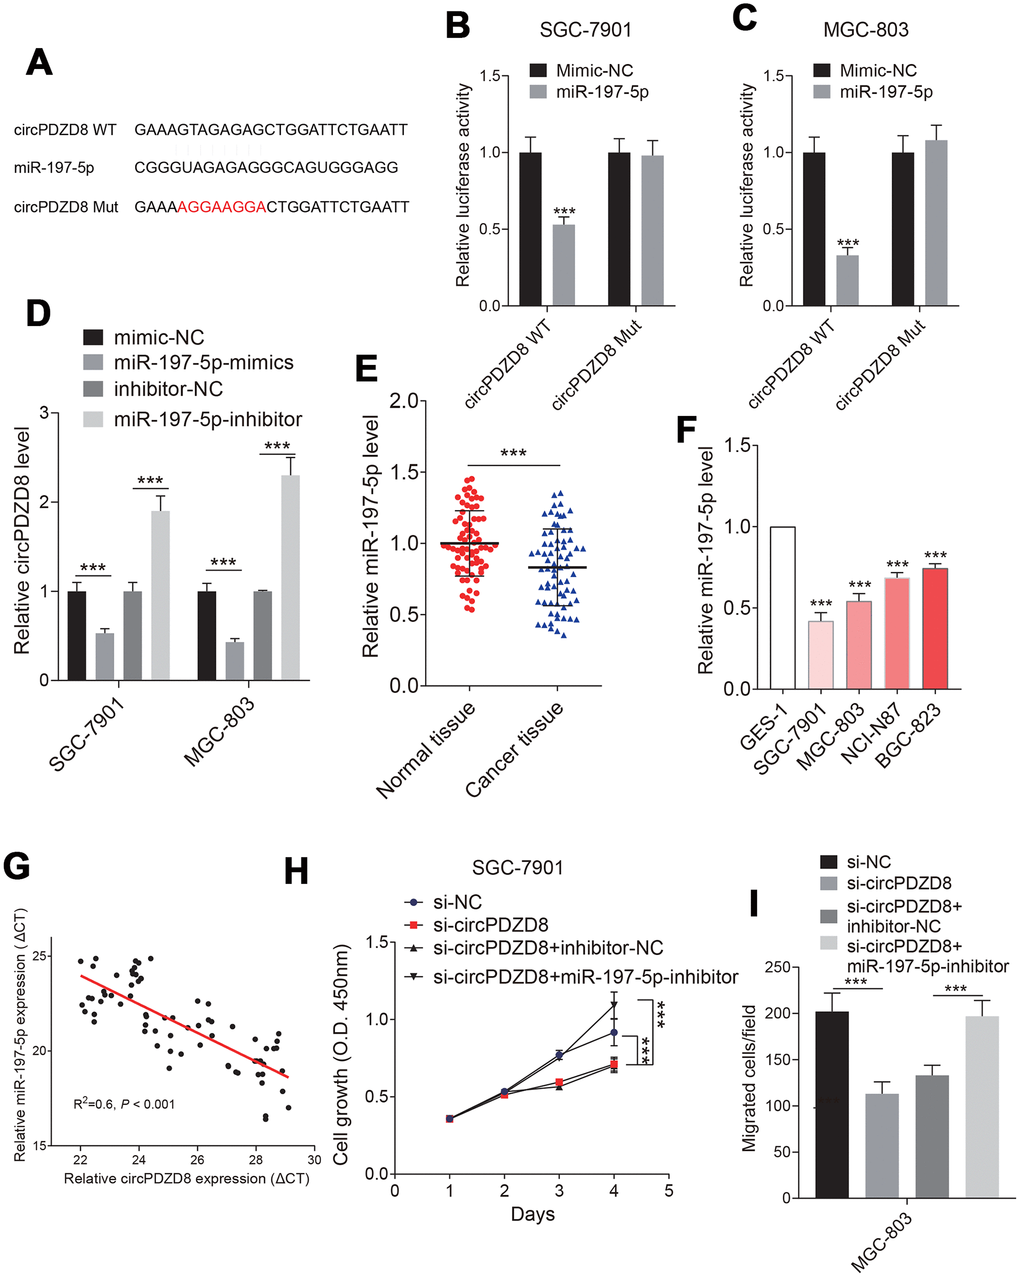 Studies on the relationship between circPDZD8 and miR-197-5p in gastric cancer cells. (A) The binding sites and mutated sites of circPDZD8 and miR-197-5p were predicted by StarBase v.3.0. (B, C) The luciferase activity in SGC-7901 and MGC-803 cells co-transfected with circPDZD8-WT or circPDZD8-Mut and miR-197-5p-mimics or mimics-NC was assessed by dual-luciferase reporter assay. (D) circPDZD8 expression level in SGC-7901 and MGC-803 cells transfected with miR-197-5p inhibitors or NC were measured by RT-qPCR. (E, F) miR-197-5p expression in gastric cancer tissues and cell lines was measured by RT-qPCR. (G) The correlation of circPDZD8 and miR-197-5p in gastric cancer tissues was analyzed by Pearson’s test (R2=0.6, P H) The proliferation of SGC-7901 and MGC-803 cells transfected with si-NC, si-circPDZD8-1, si-circPDZD8-1 + inhibitor-NC or si-circPDZD8-1 + miR-197-5p-inhibitor was examined by MTT assay. (I) The migration of SGC-7901 and MGC-803 cells transfected with si-NC, si-circPDZD8-1, si-circPDZD8-1 + inhibitor-NC or si-circPDZD8-1 + miR-197-5p-inhibitor was detected by Transwell assay without Matrigel; *** P 